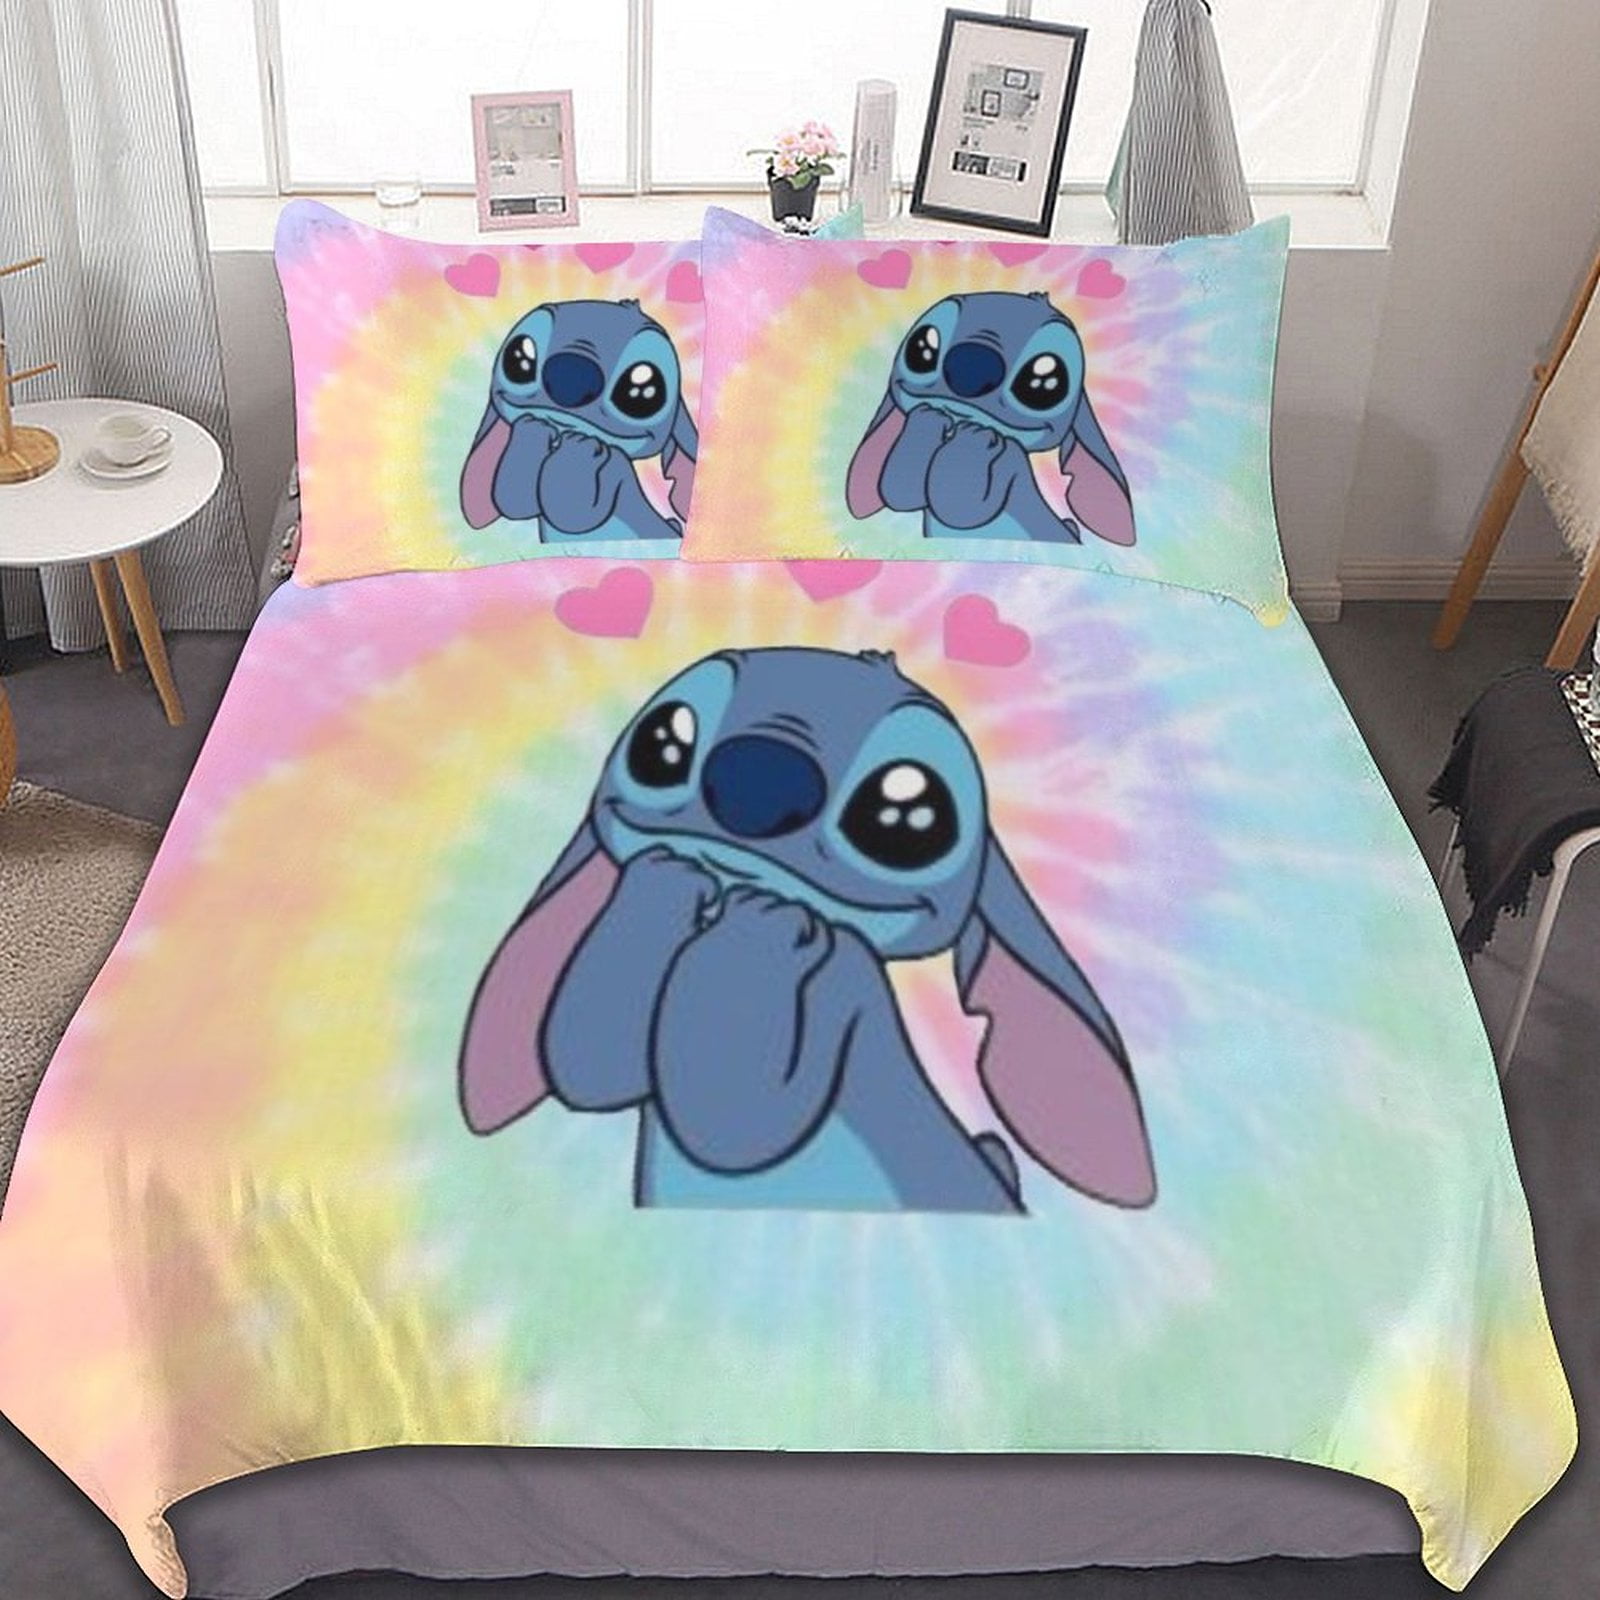  Stitch Bedding Set, Girls Super Soft Comforter Cover Set,  Stitch and Angel Quilt Cover for Kids Teen, Microfiber Comforter Cover for  All Season 3pcs with Pillowcases : Home & Kitchen